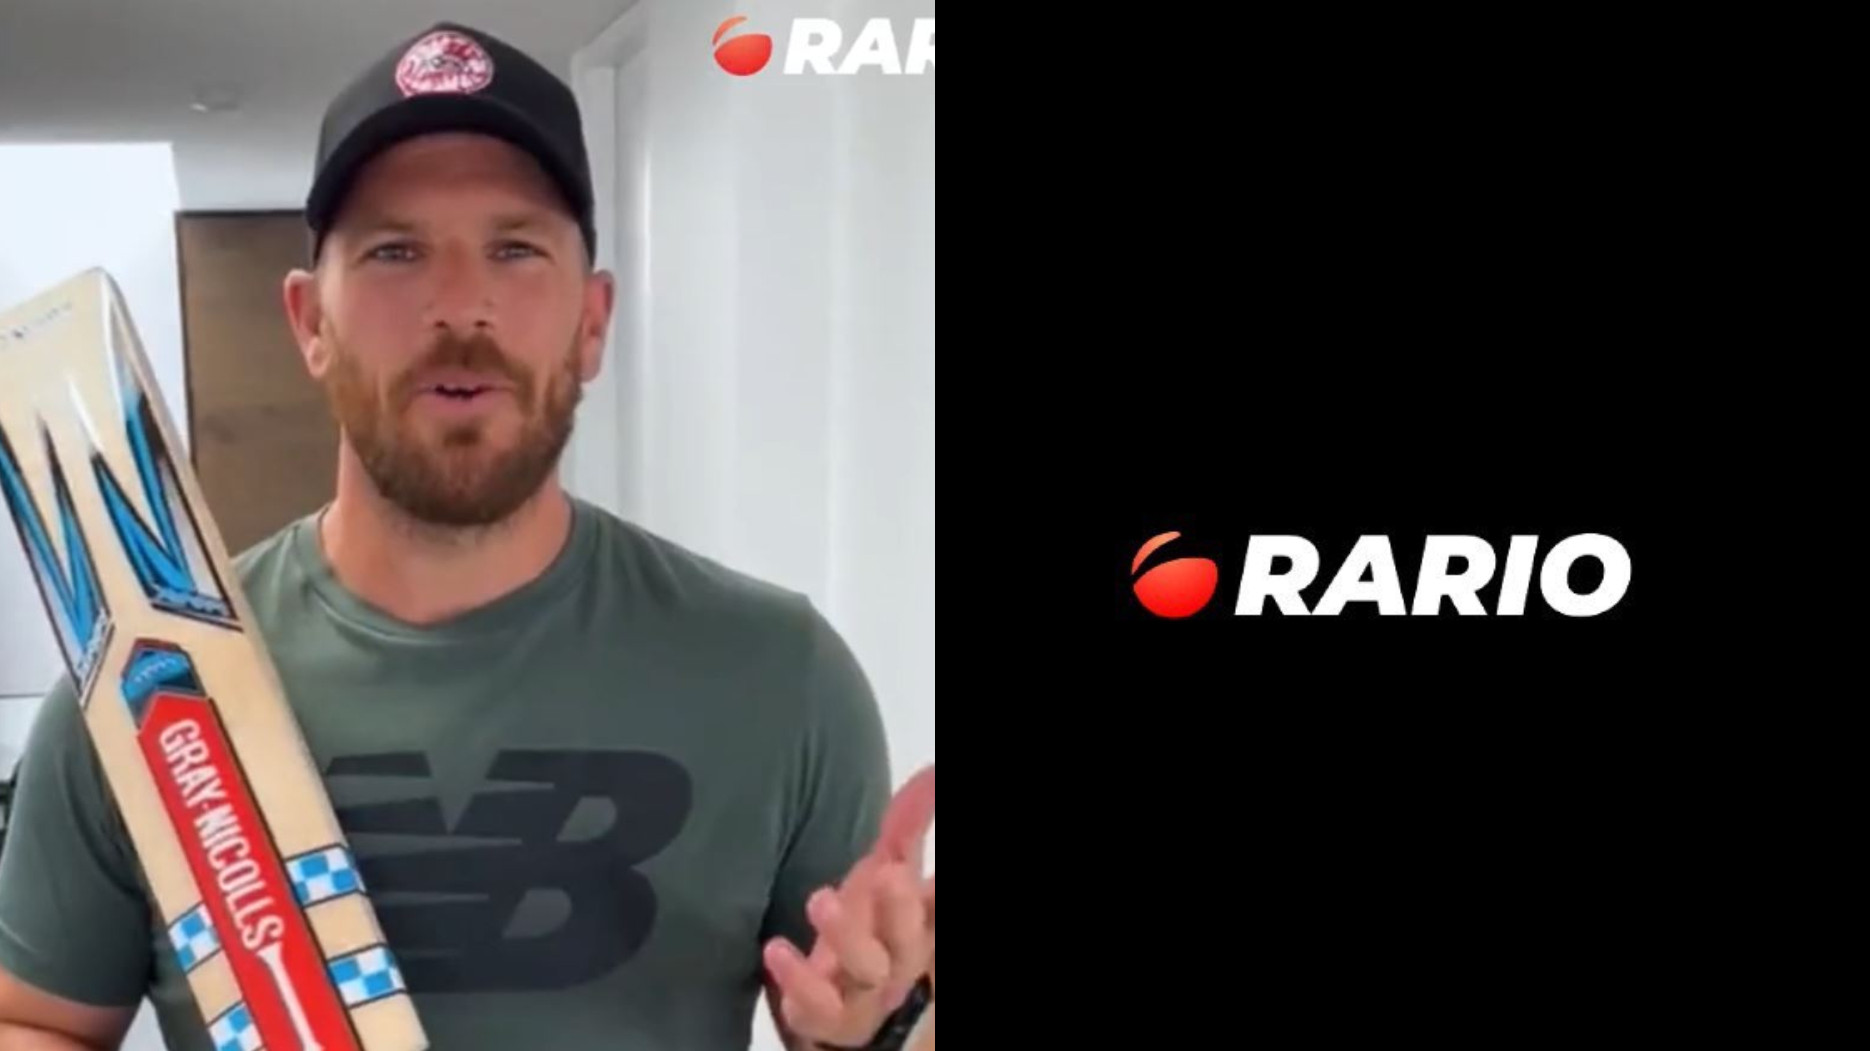 Aaron Finch comes onboard Rario, India’s first-ever official cricket NFT platform